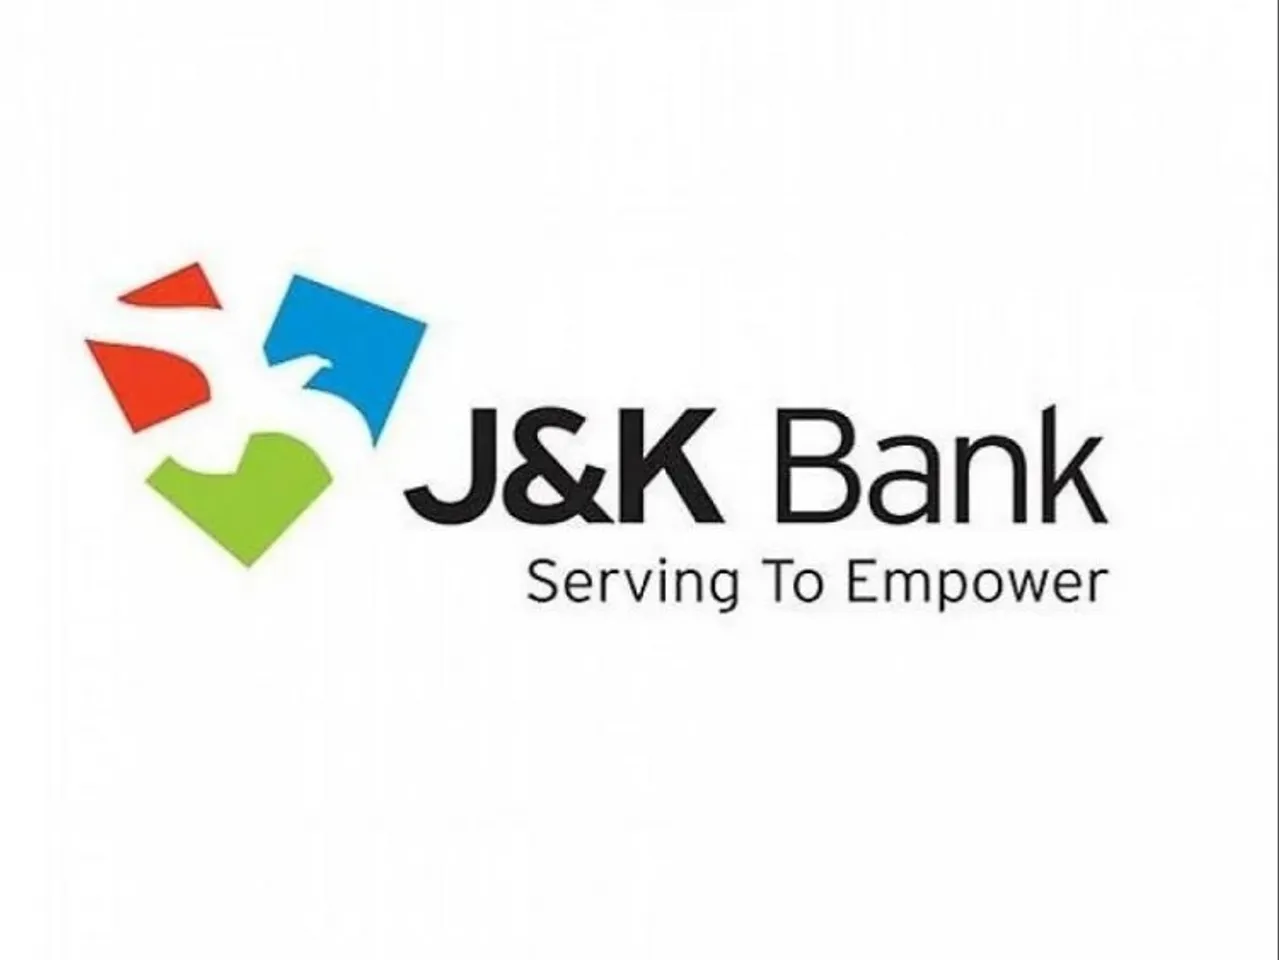 J&K Bank aims to achieve business of Rs 4 lakh cr in next 5 yrs: MD & CEO Baldev Prakash